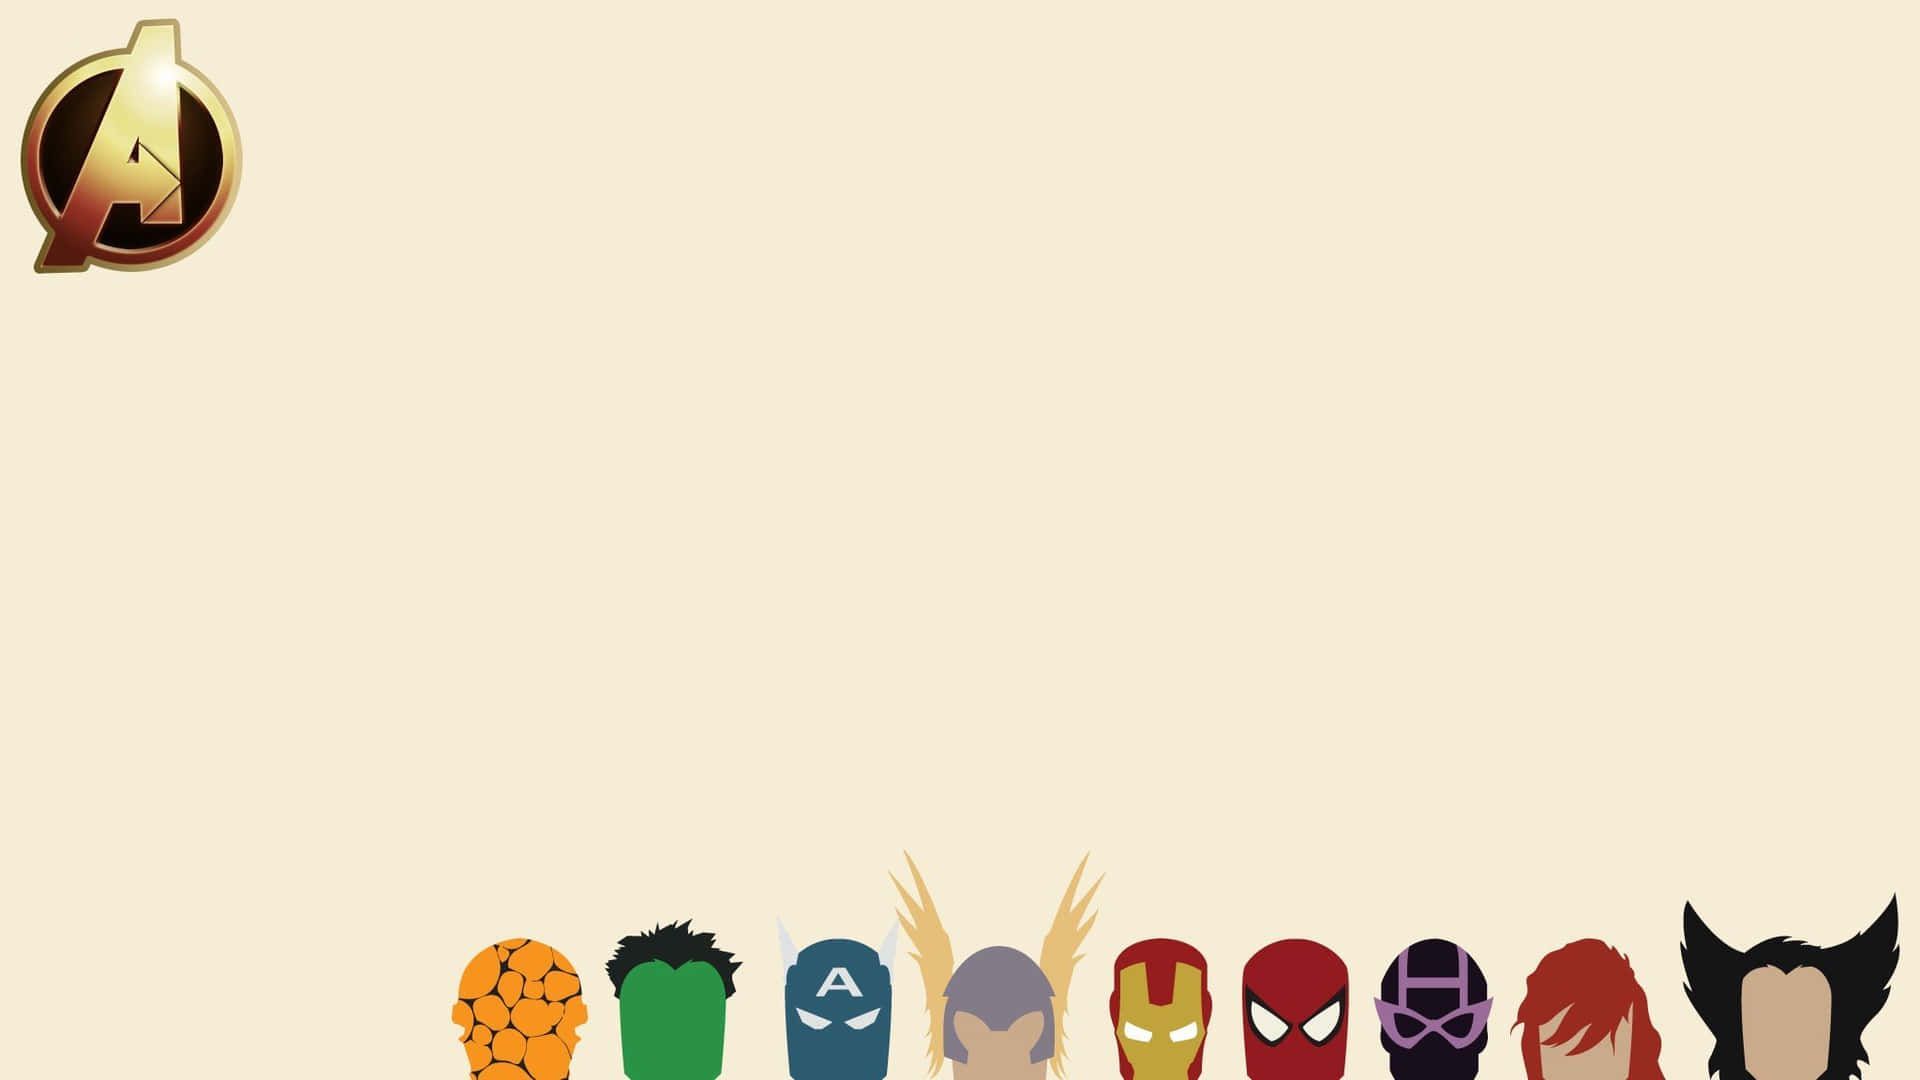 Minimalistic The Avengers wallpaper with high-resolution 1920x1080 pixel. You can use this wallpaper for your Windows and Mac OS computers as well as your Android and iPhone smartphones - Marvel, Avengers